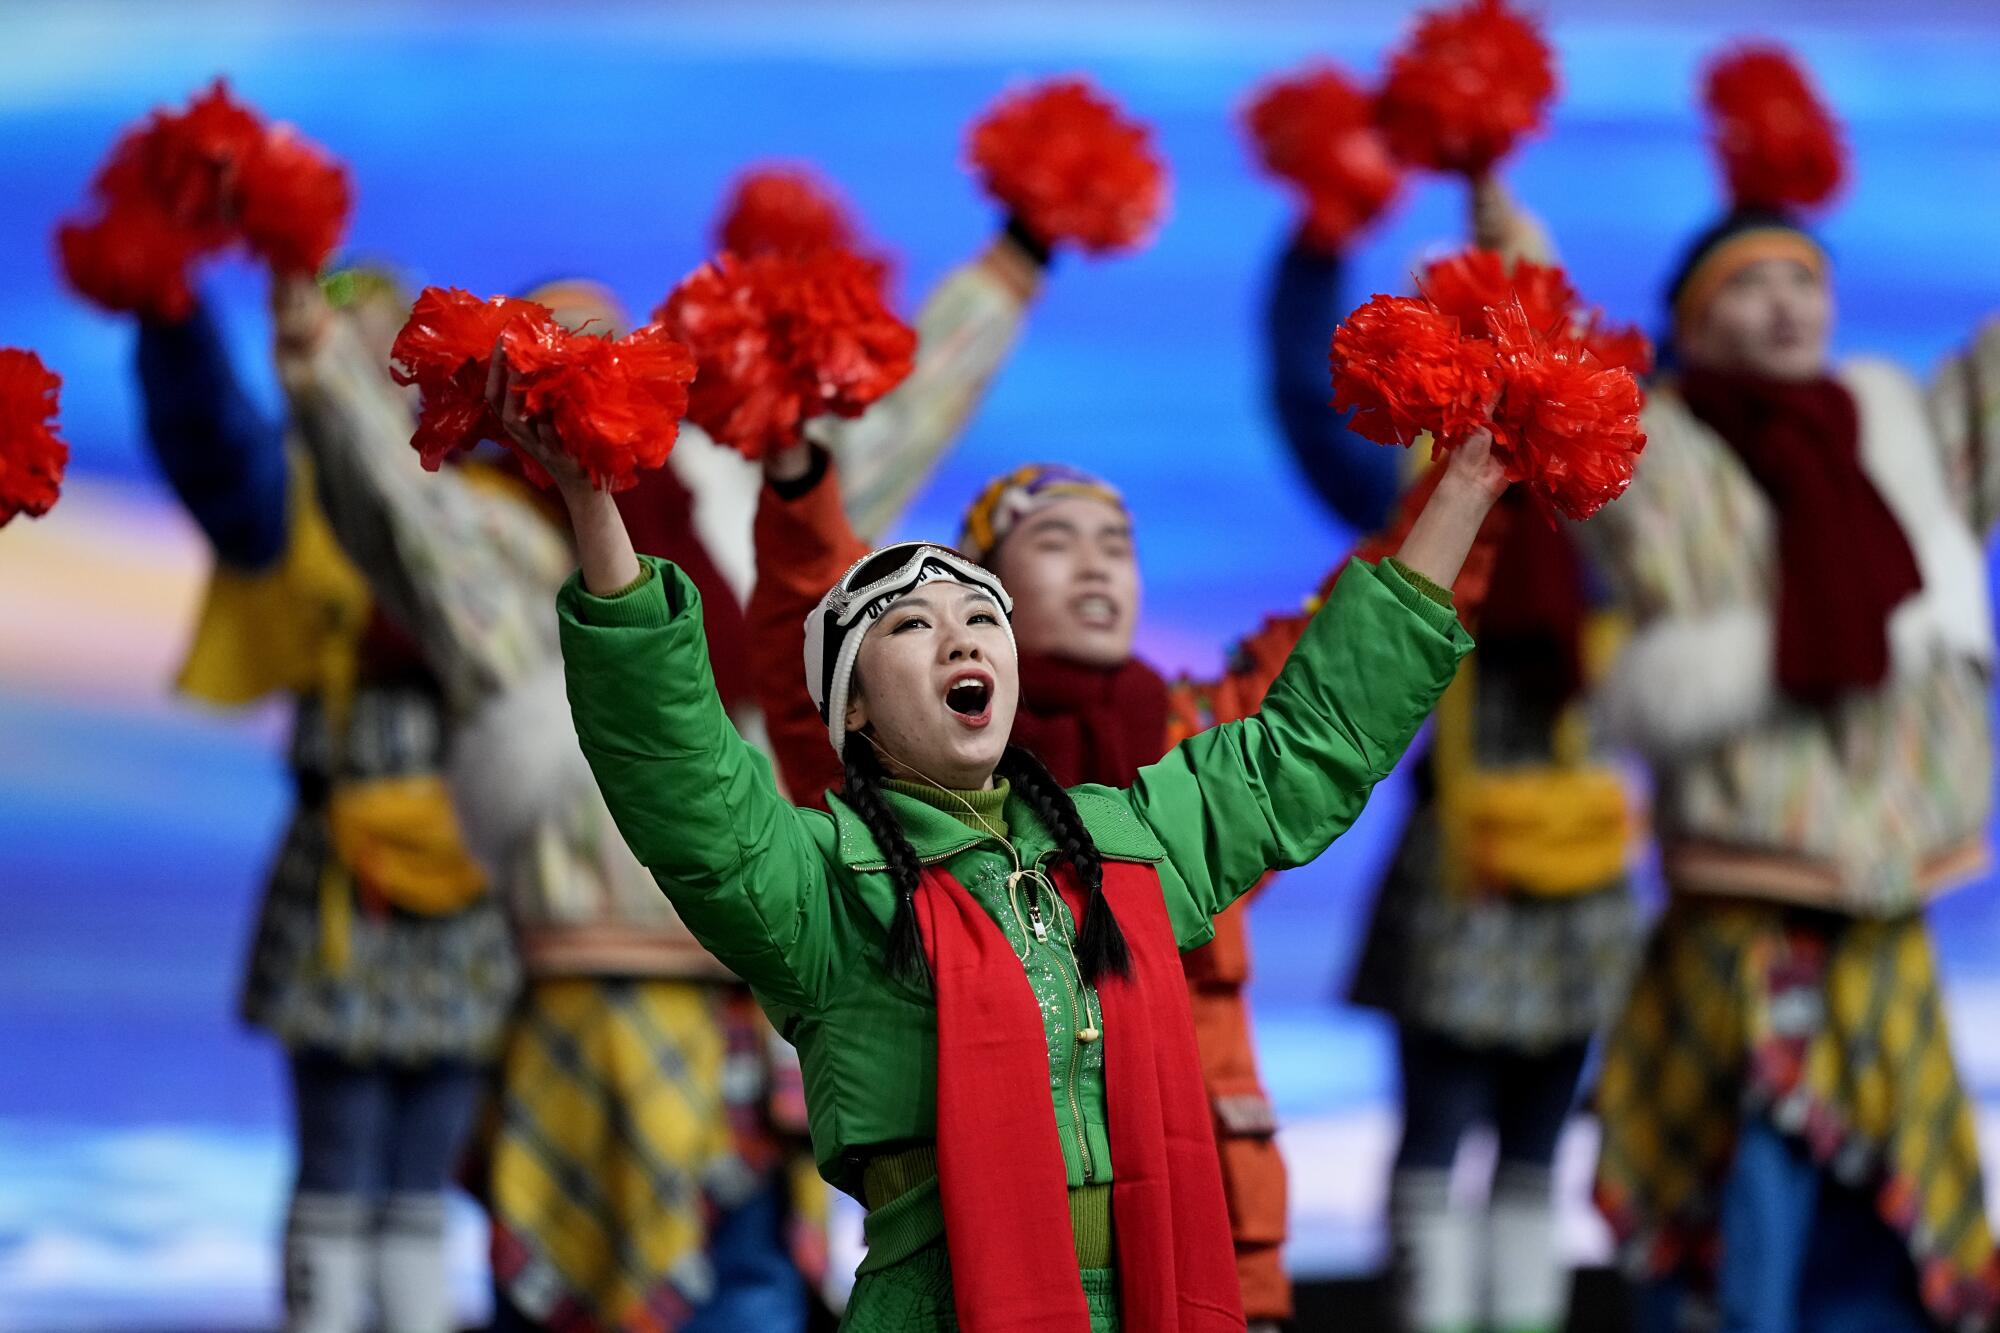 Actors cheer as China's President Xi Jinping arrives for the opening ceremony of the 2022 Winter Olympics in Beijing.